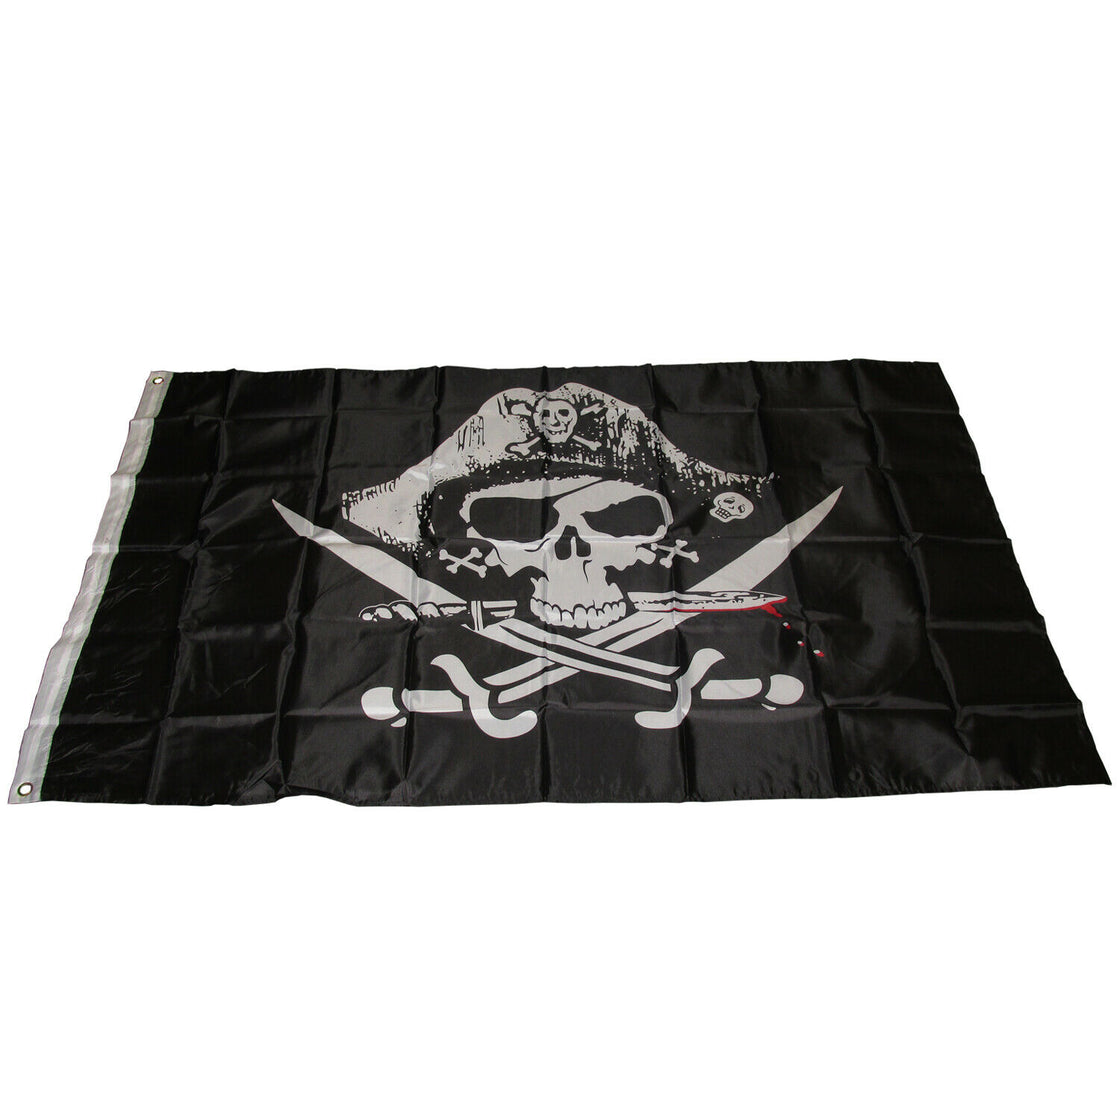 5FT X 3FT POLYESTER PIRATE FLAG - PGS Supplies 21 Ltd